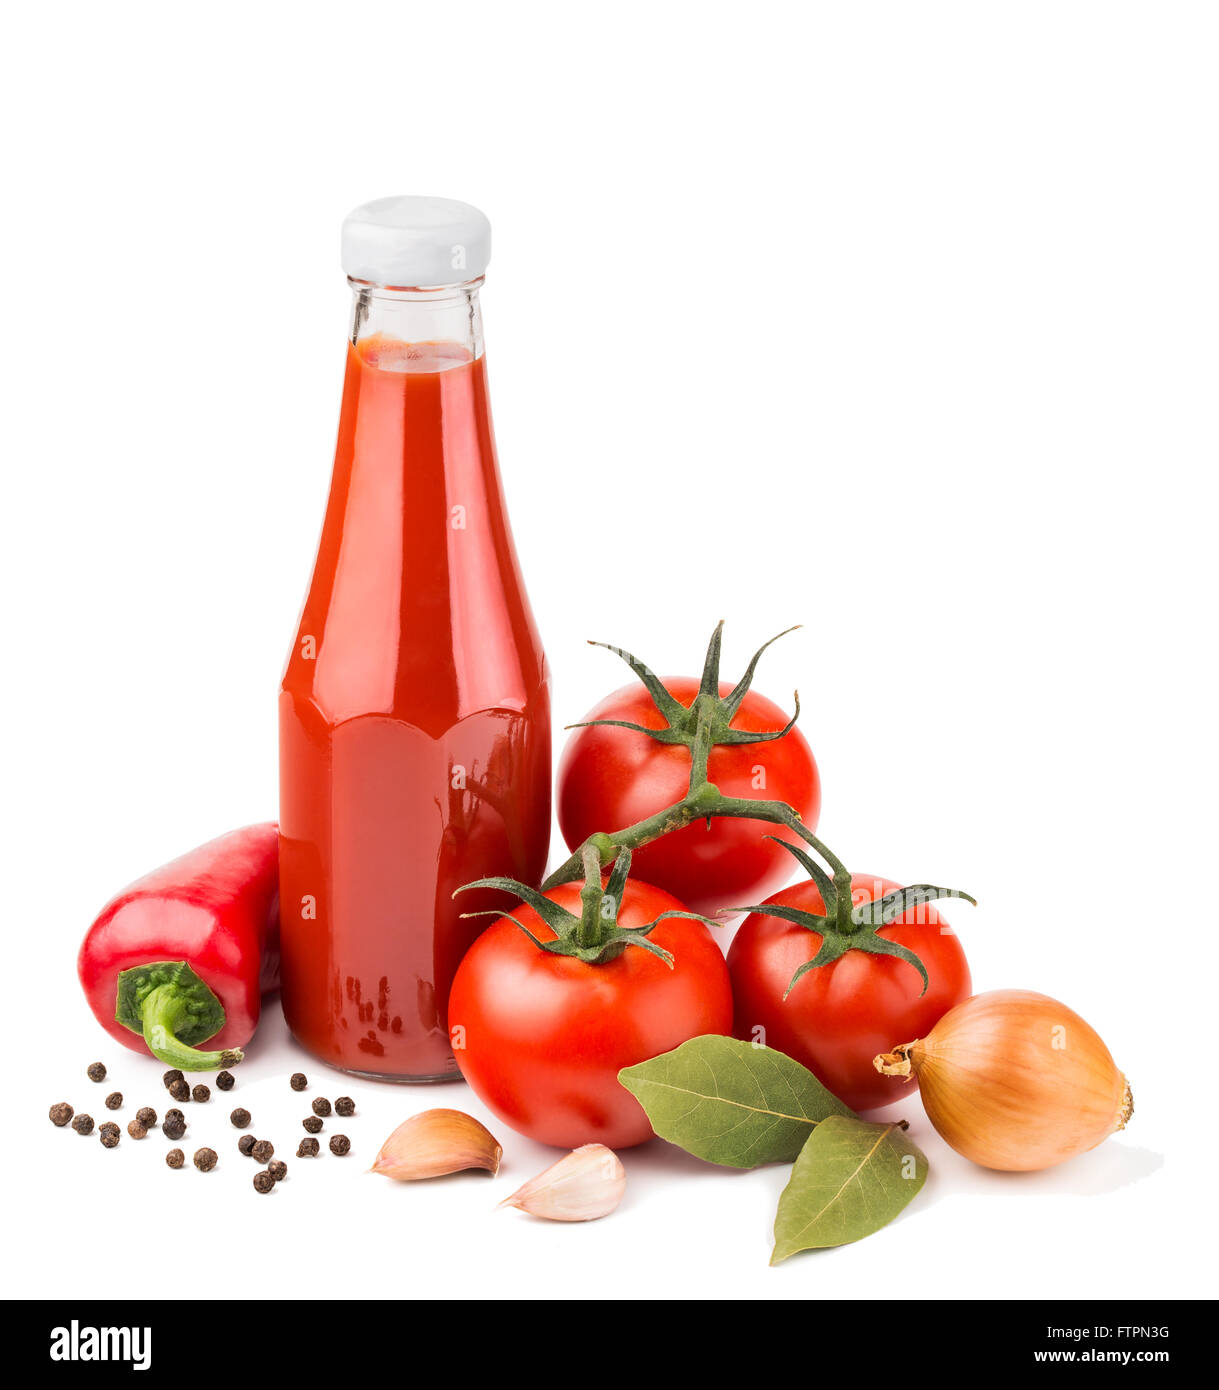 Bottle of ketchup and raw ingredients isolated on white Stock Photo